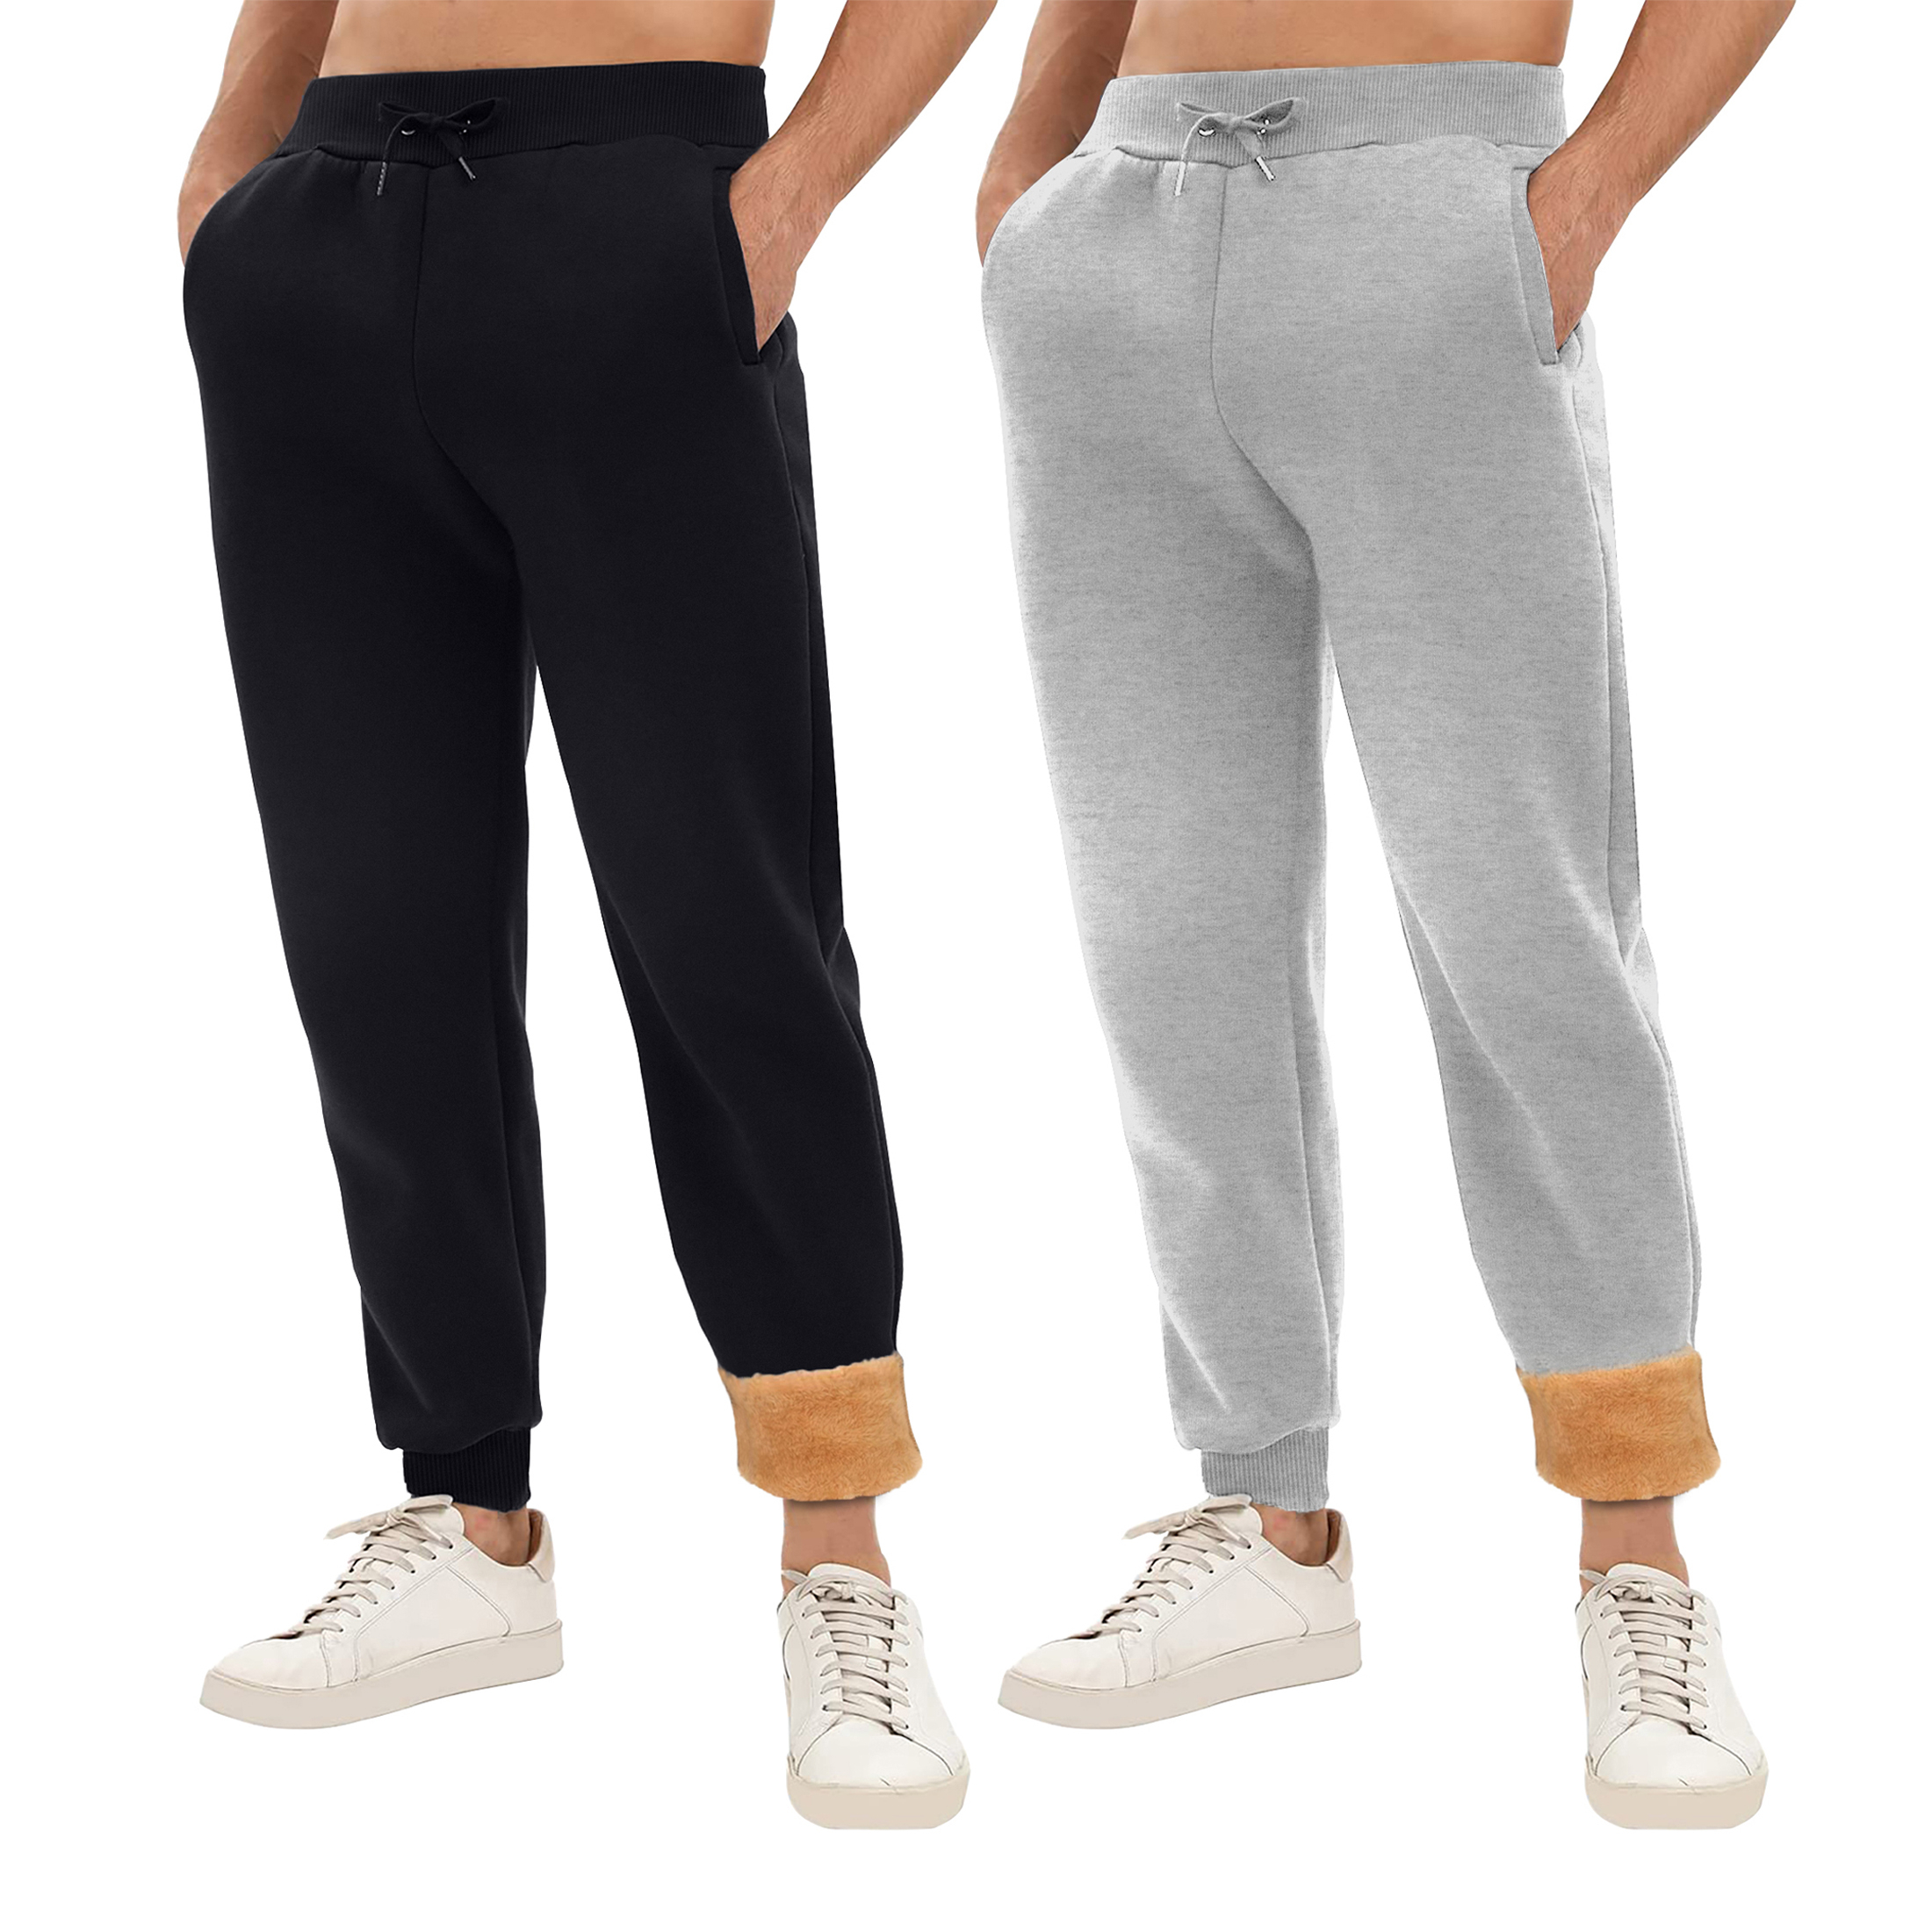 2-Pack: Men's Winter Warm Thick Sherpa Lined Jogger Track Pants With Pockets - Black & Grey, Small